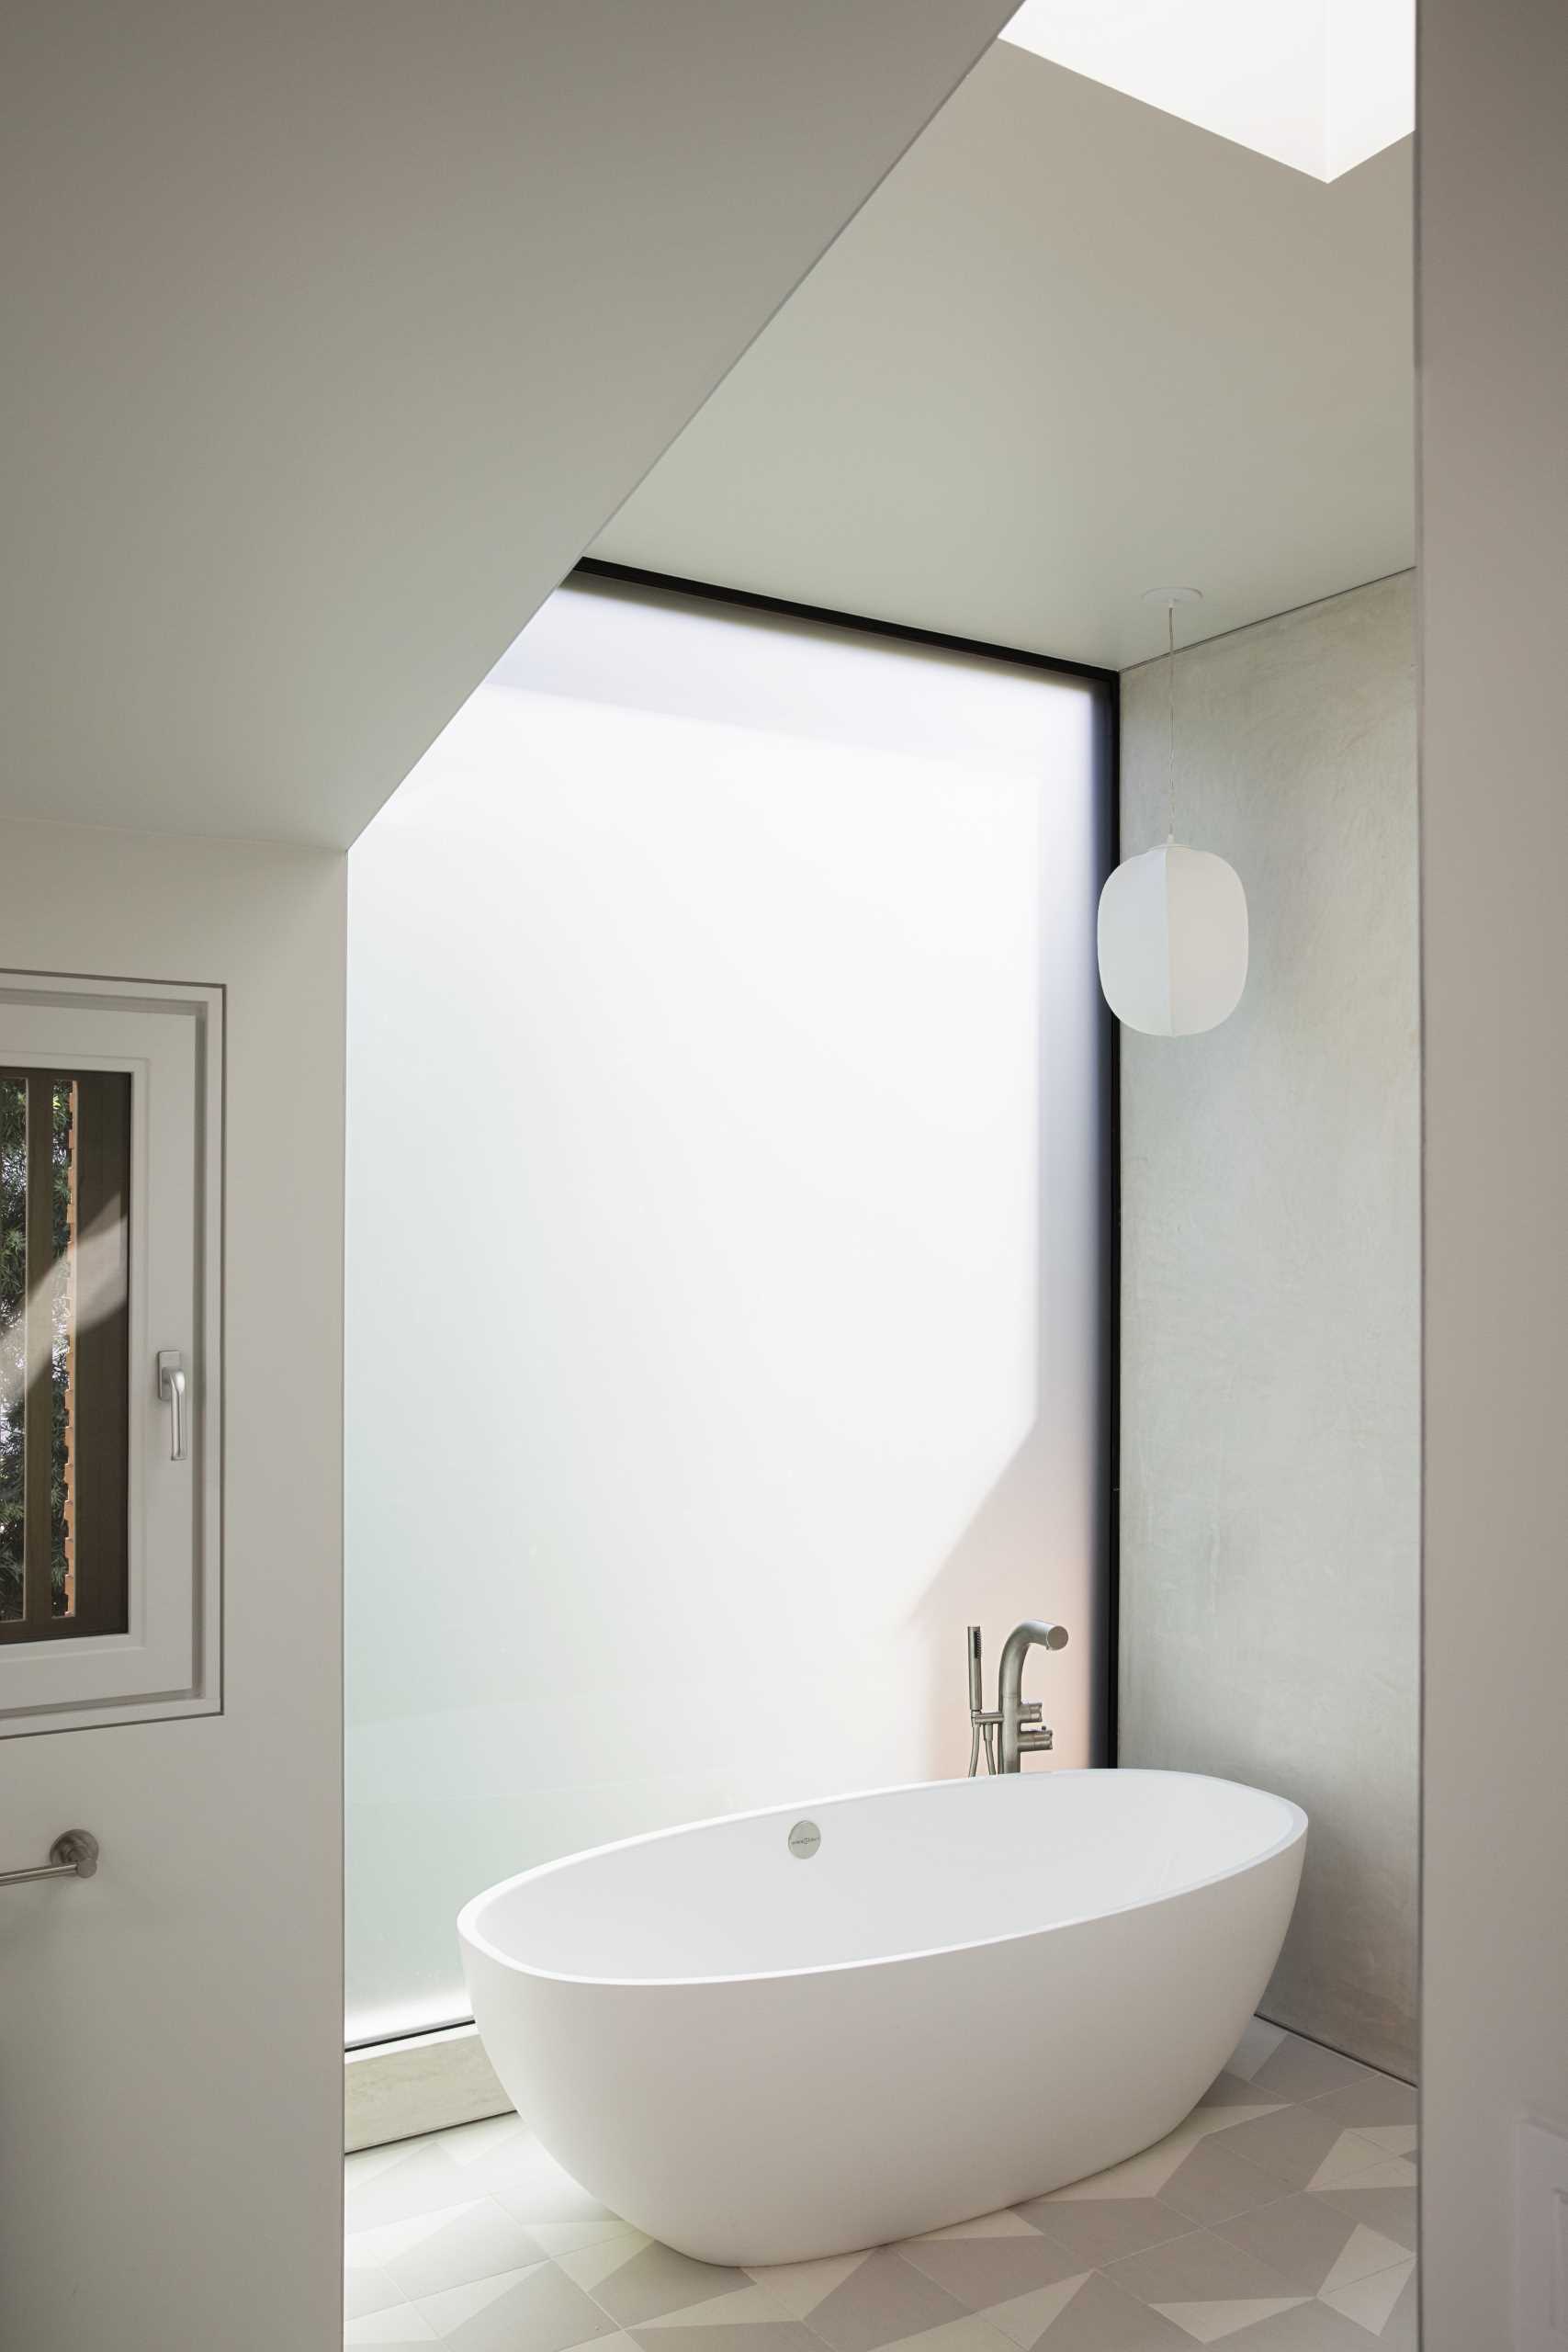 In this primary bathroom, the freestanding bathtub is positioned in front of the large window, while a secondary window by the vanity has wood slats providing privacy even when the window is open.